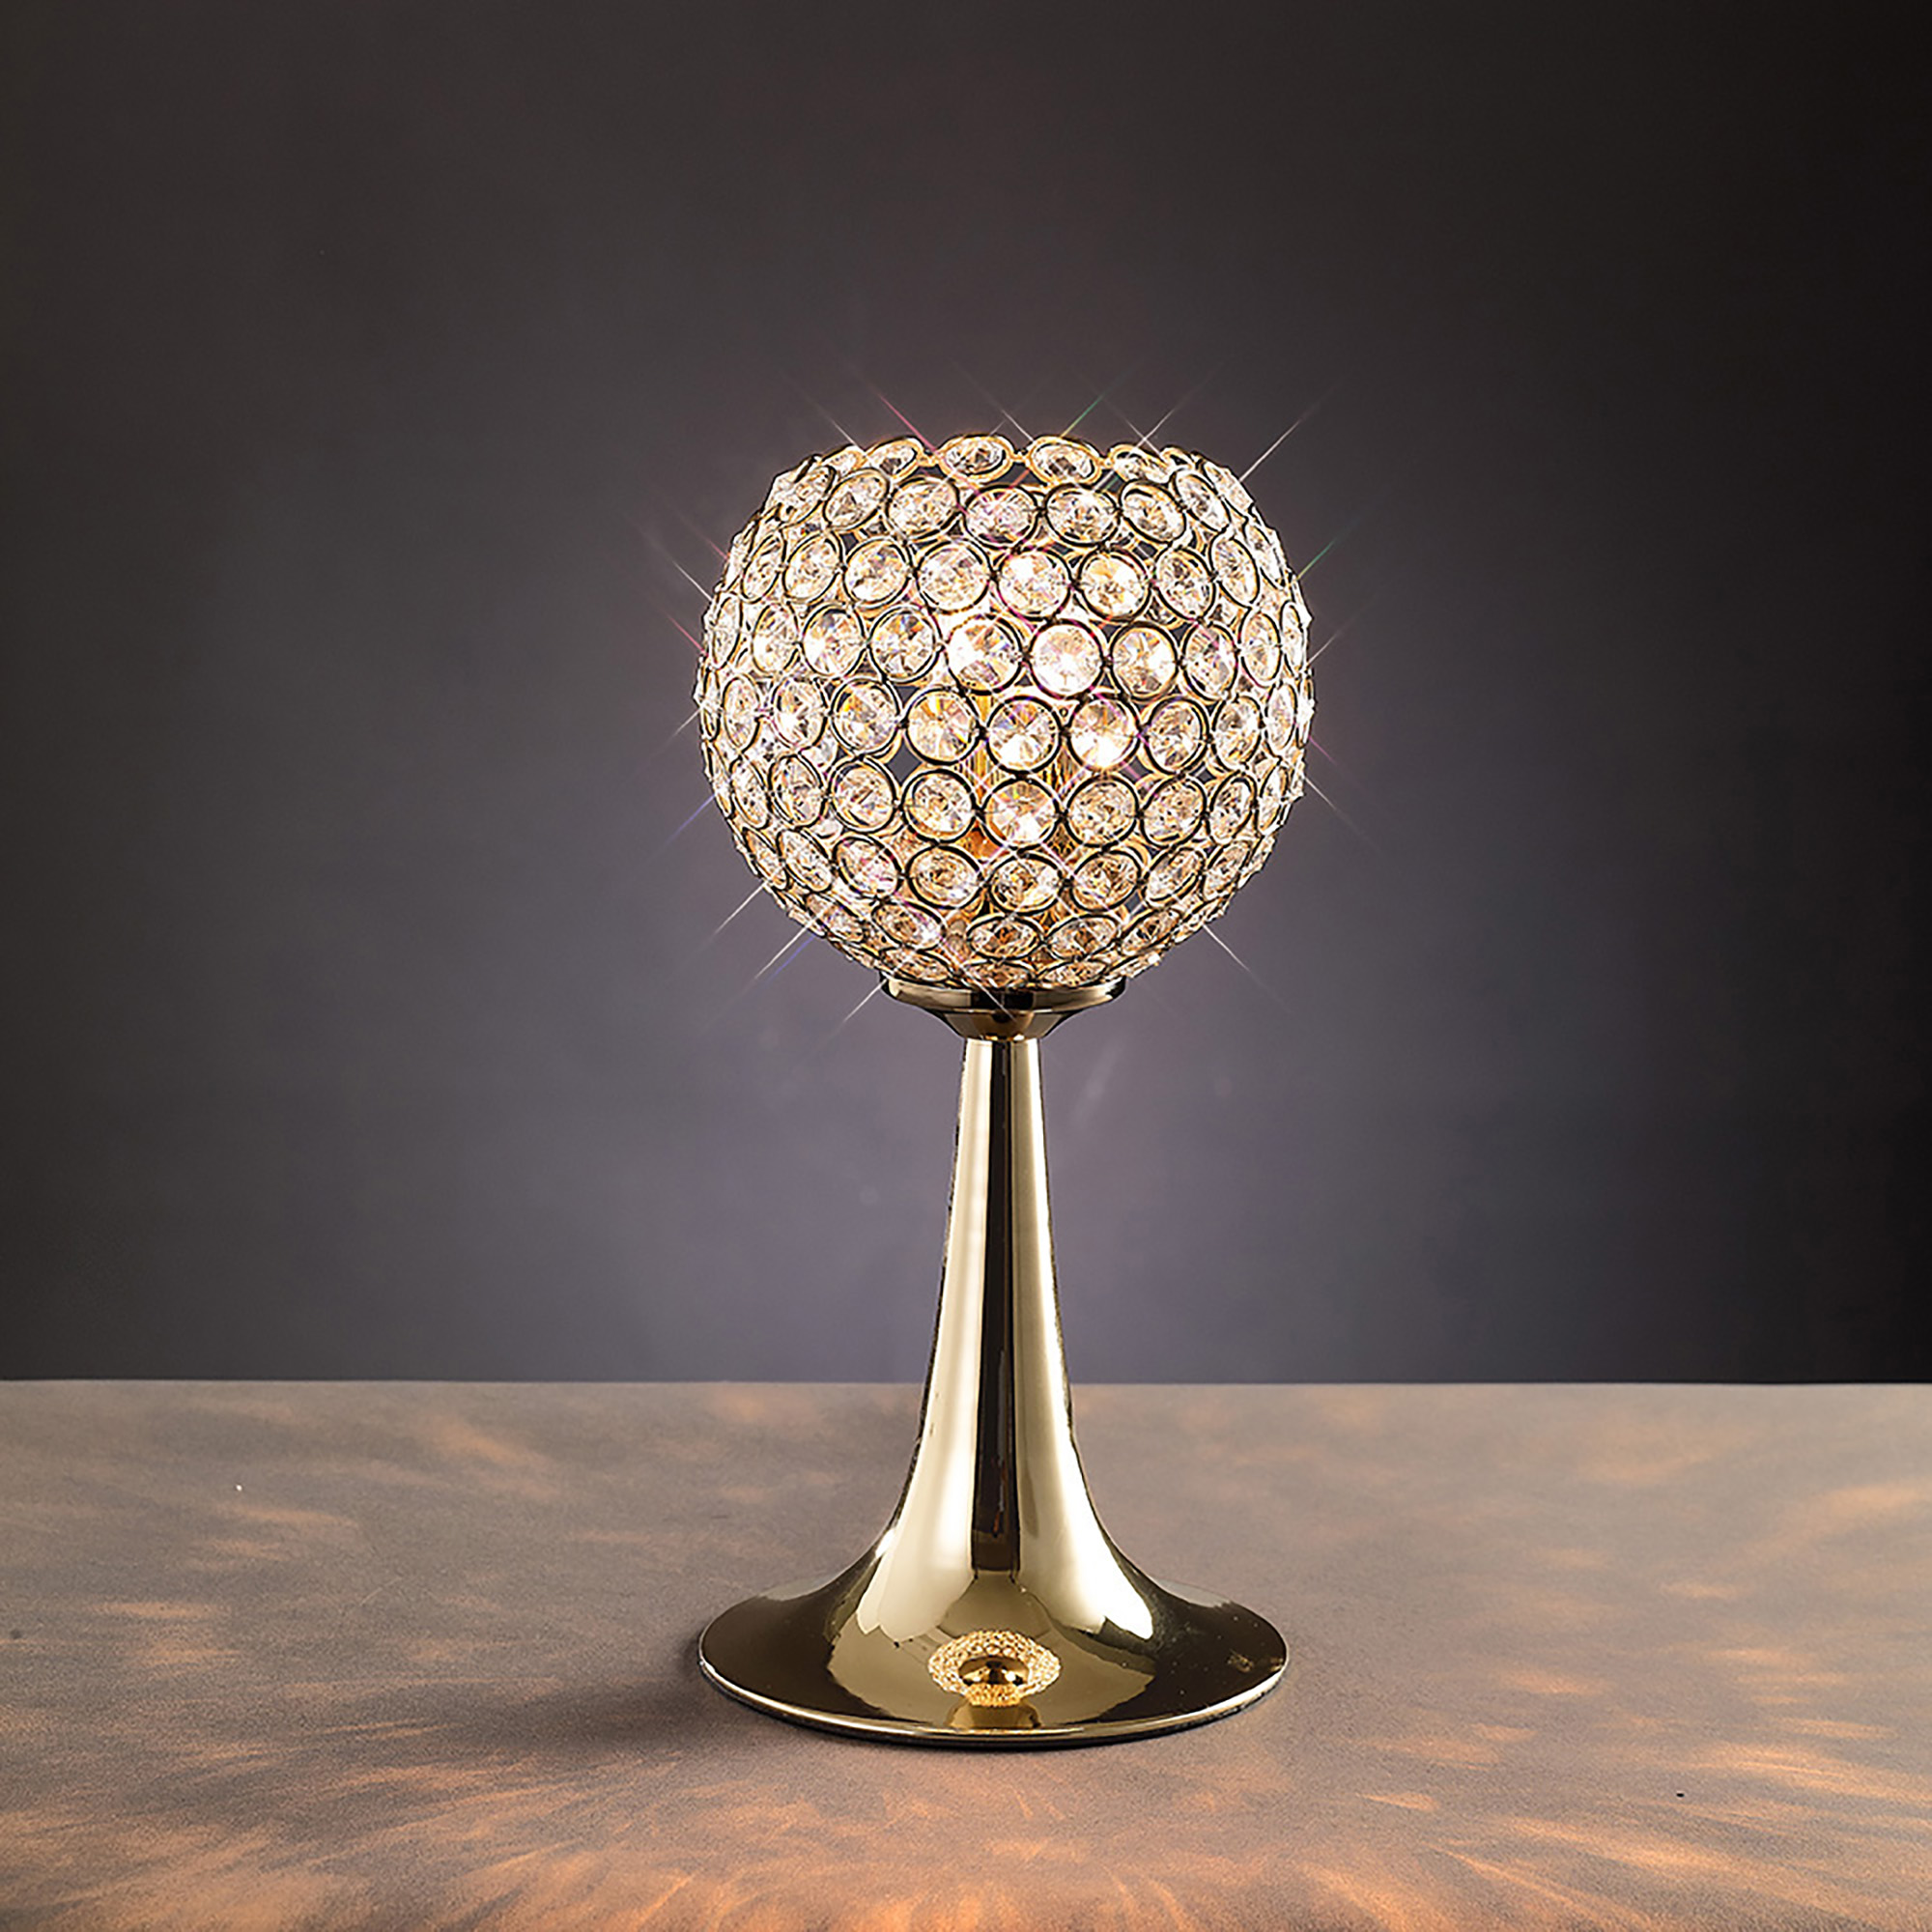 IL30755  Ava Crystal 32cm 2 Light Table Lamp French Gold